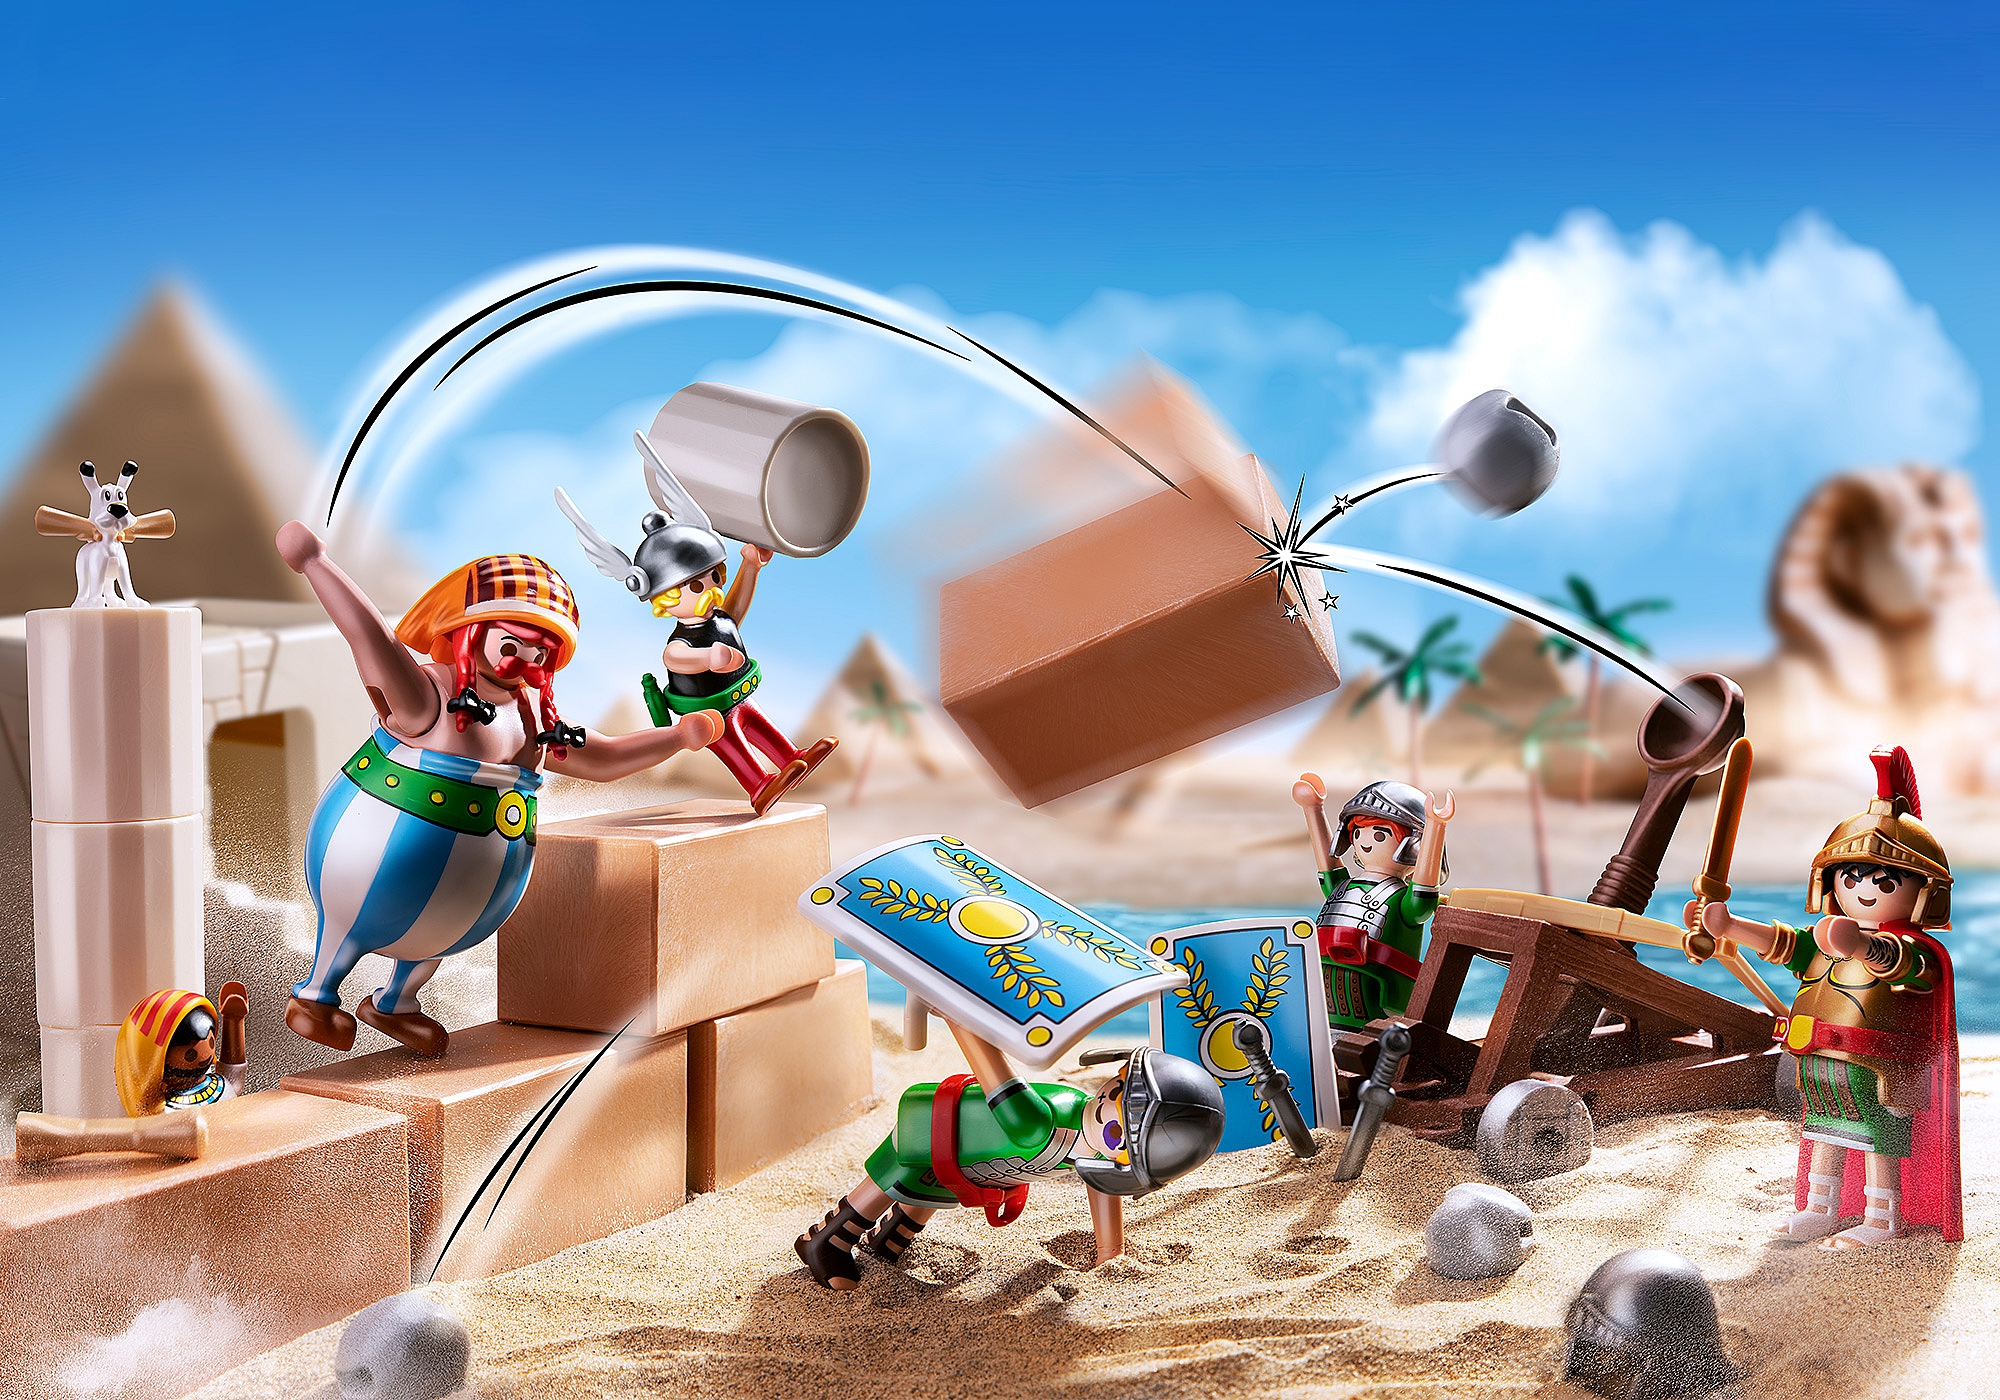 Playmobil FunPark Malta - 💥The popular Adventures of Asterix comic series  arrived to Playmobil! French Popular Culture inseparable trio of friends  Asterix the Gaul, Obelix and Idefix are having unforgettable adventures in